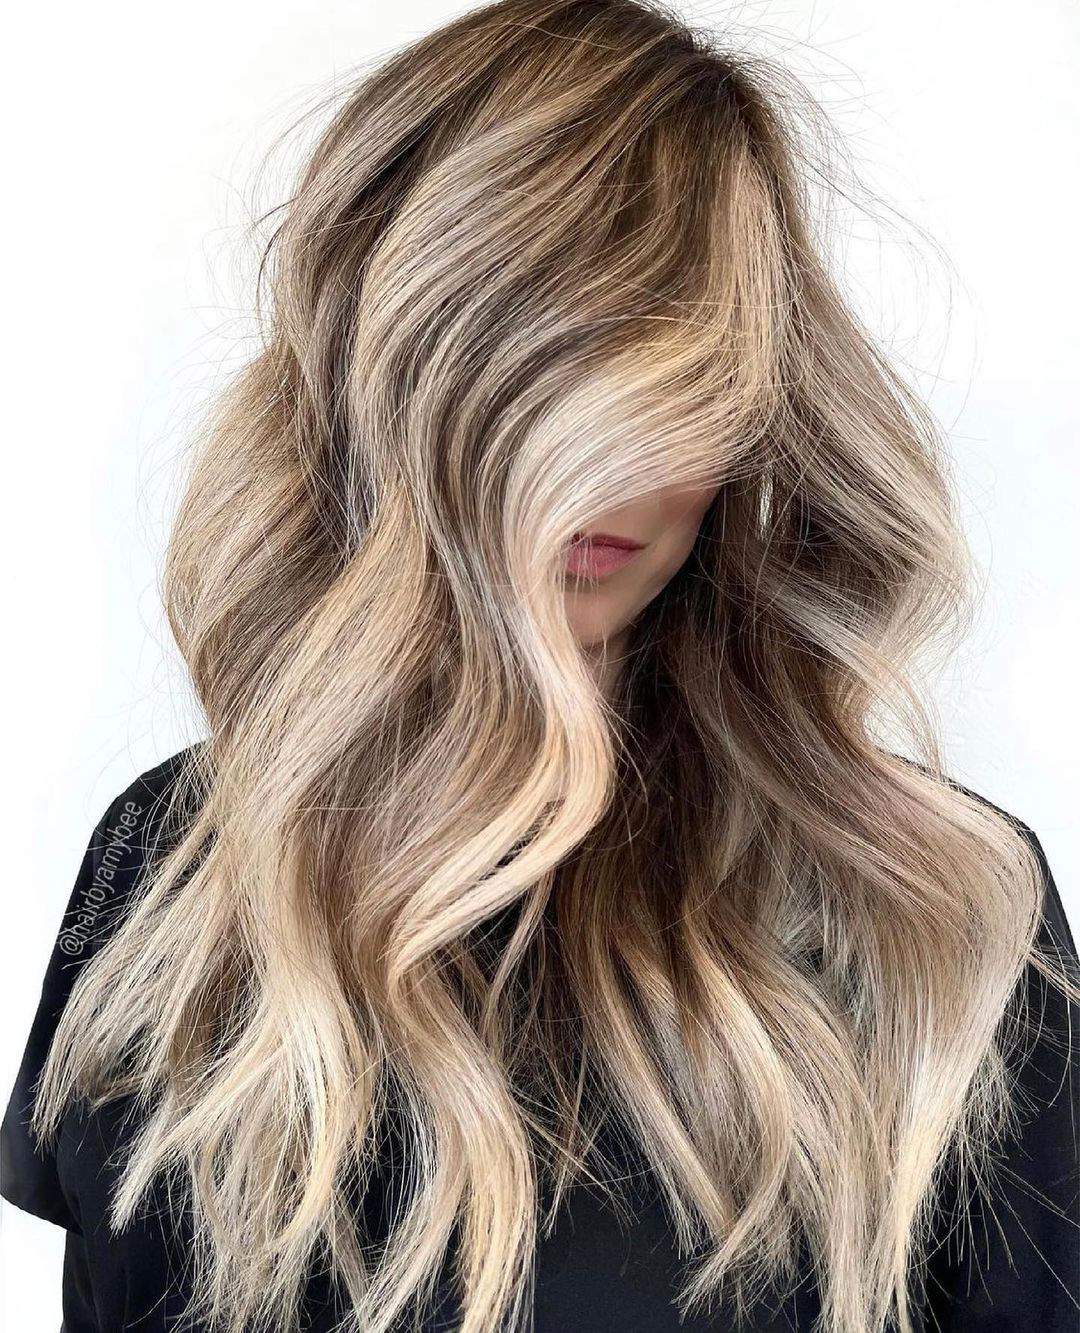 40+ Awesome Hairstyles For Girls With Long Hair images 34